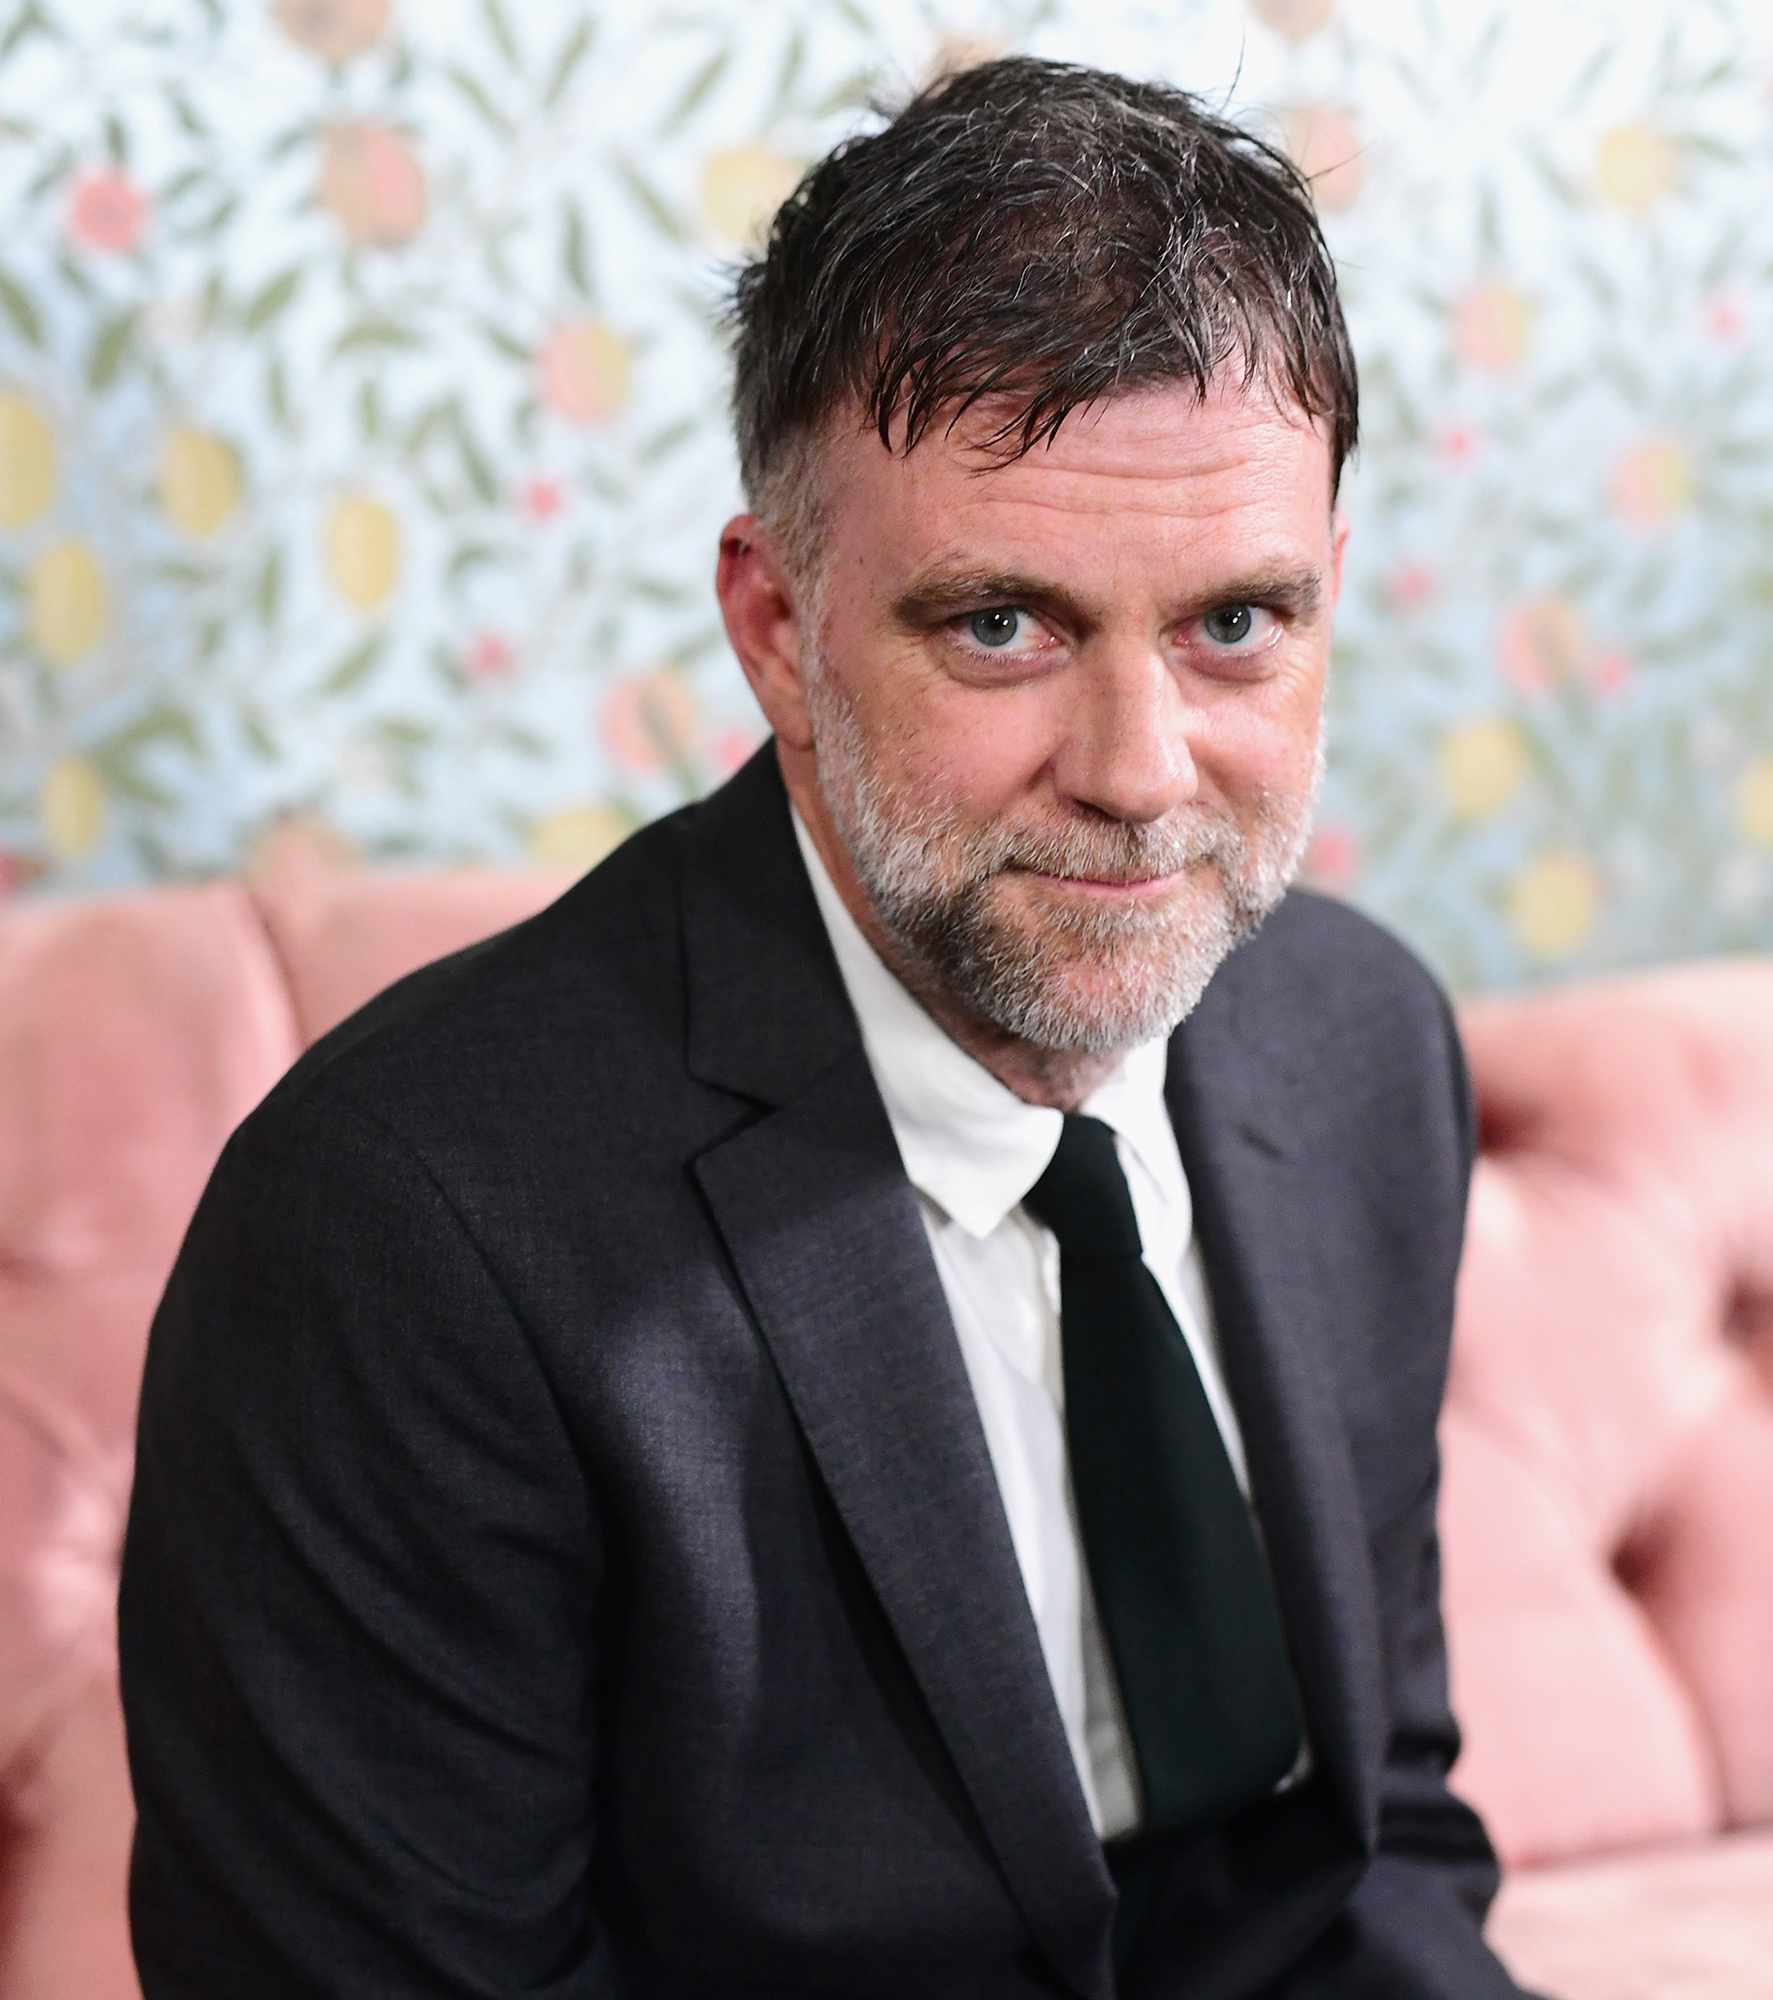 Paul Thomas Anderson attends Vanity Fair And Focus Features Celebrate The Film "Phantom Thread" with Paul Thomas Anderson at the Chateau Marmont on January 10, 2018 in Los Angeles, California